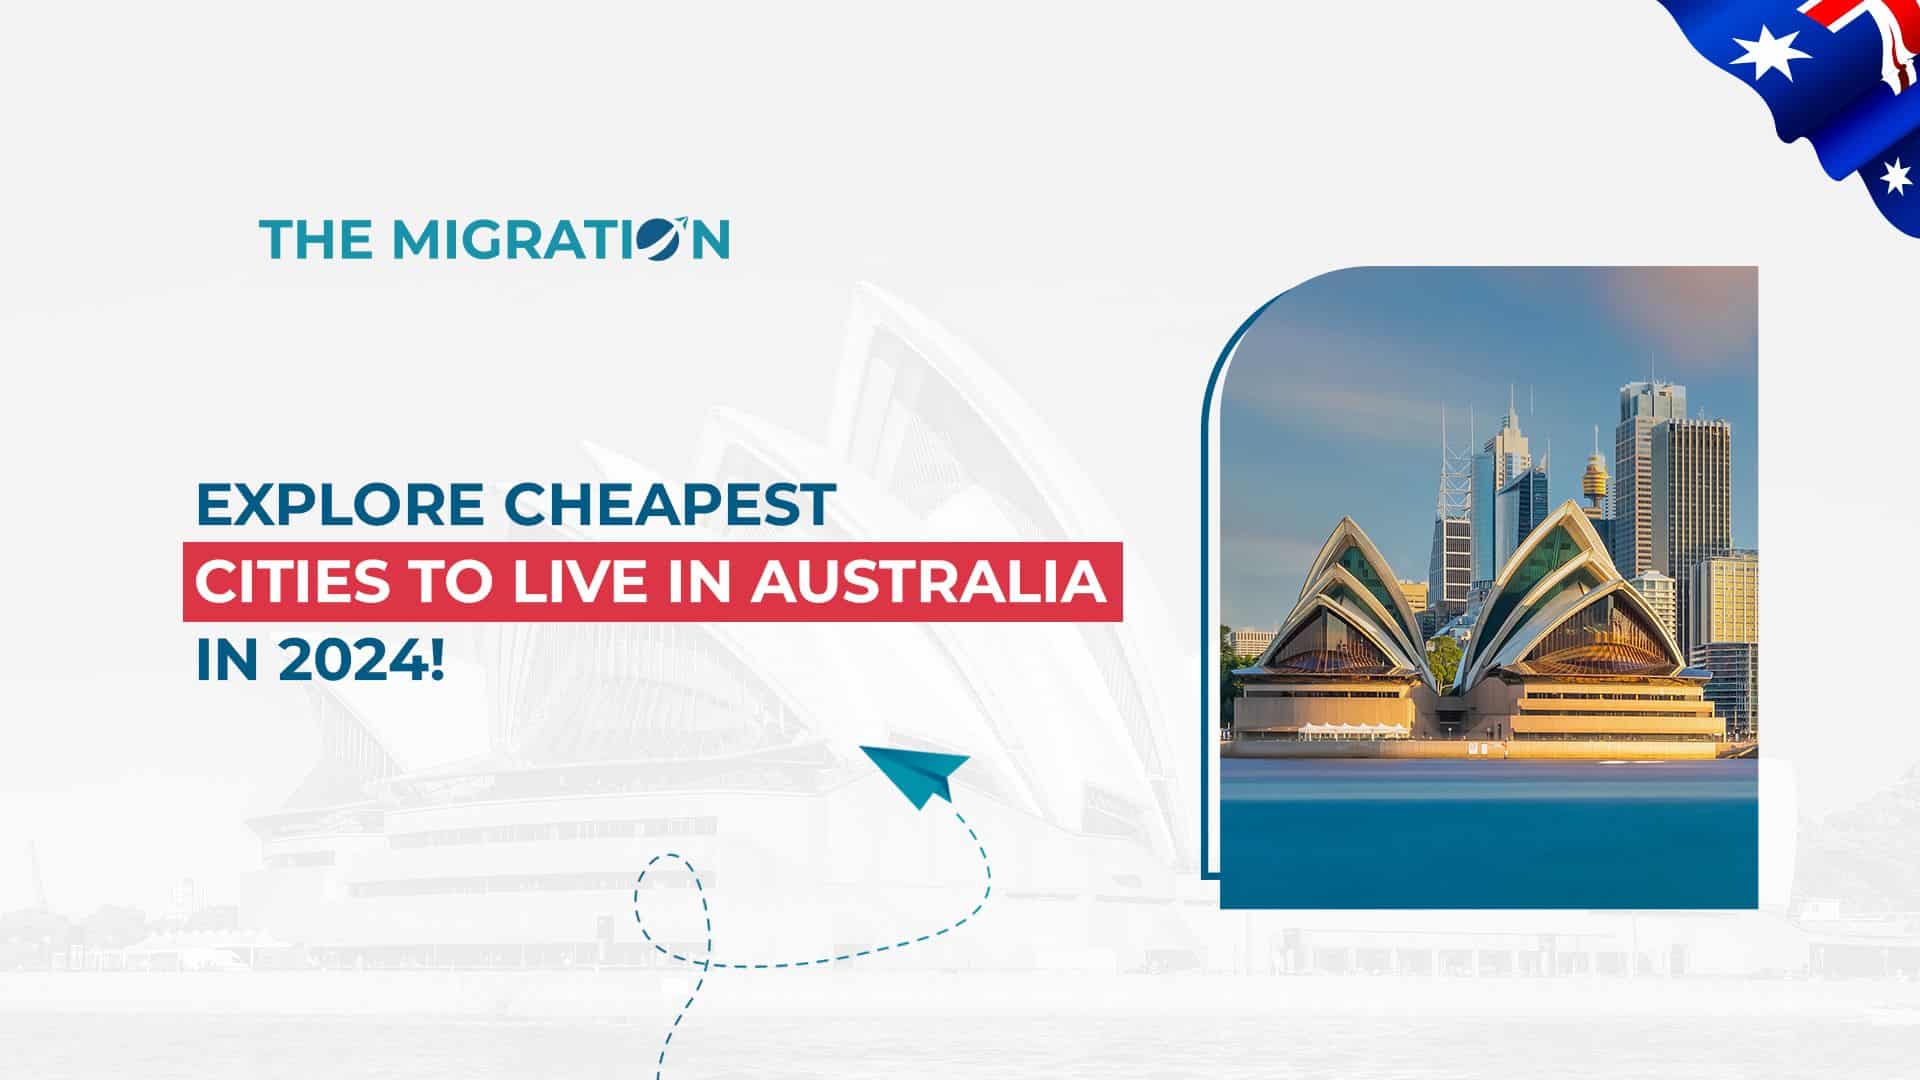 Explore Cheapest Cities to Live in Australia in 2024